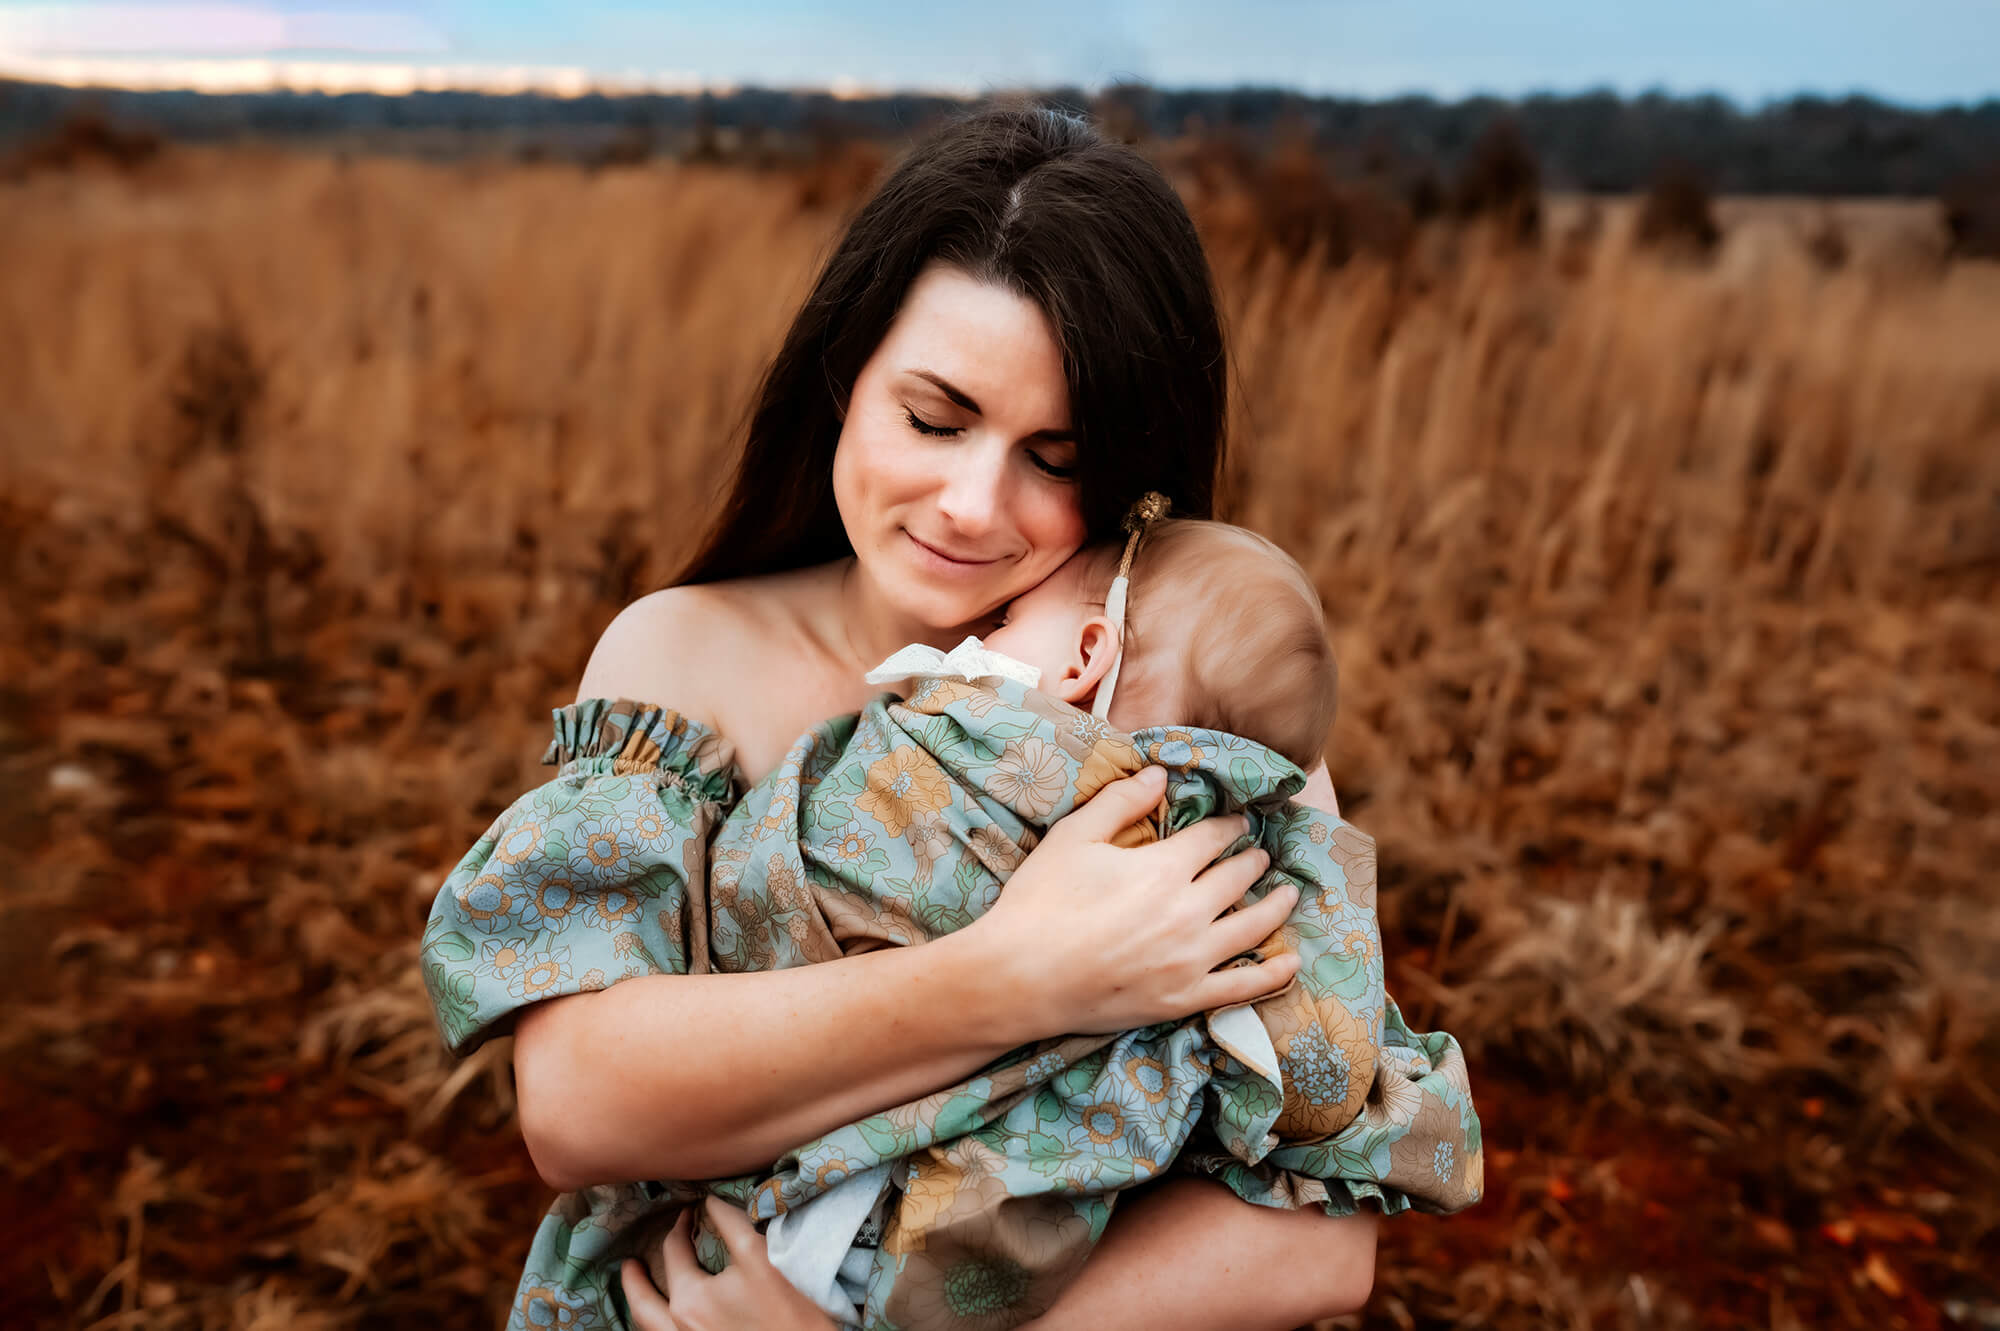 Springfield MO photographer captures mom hugging baby in field